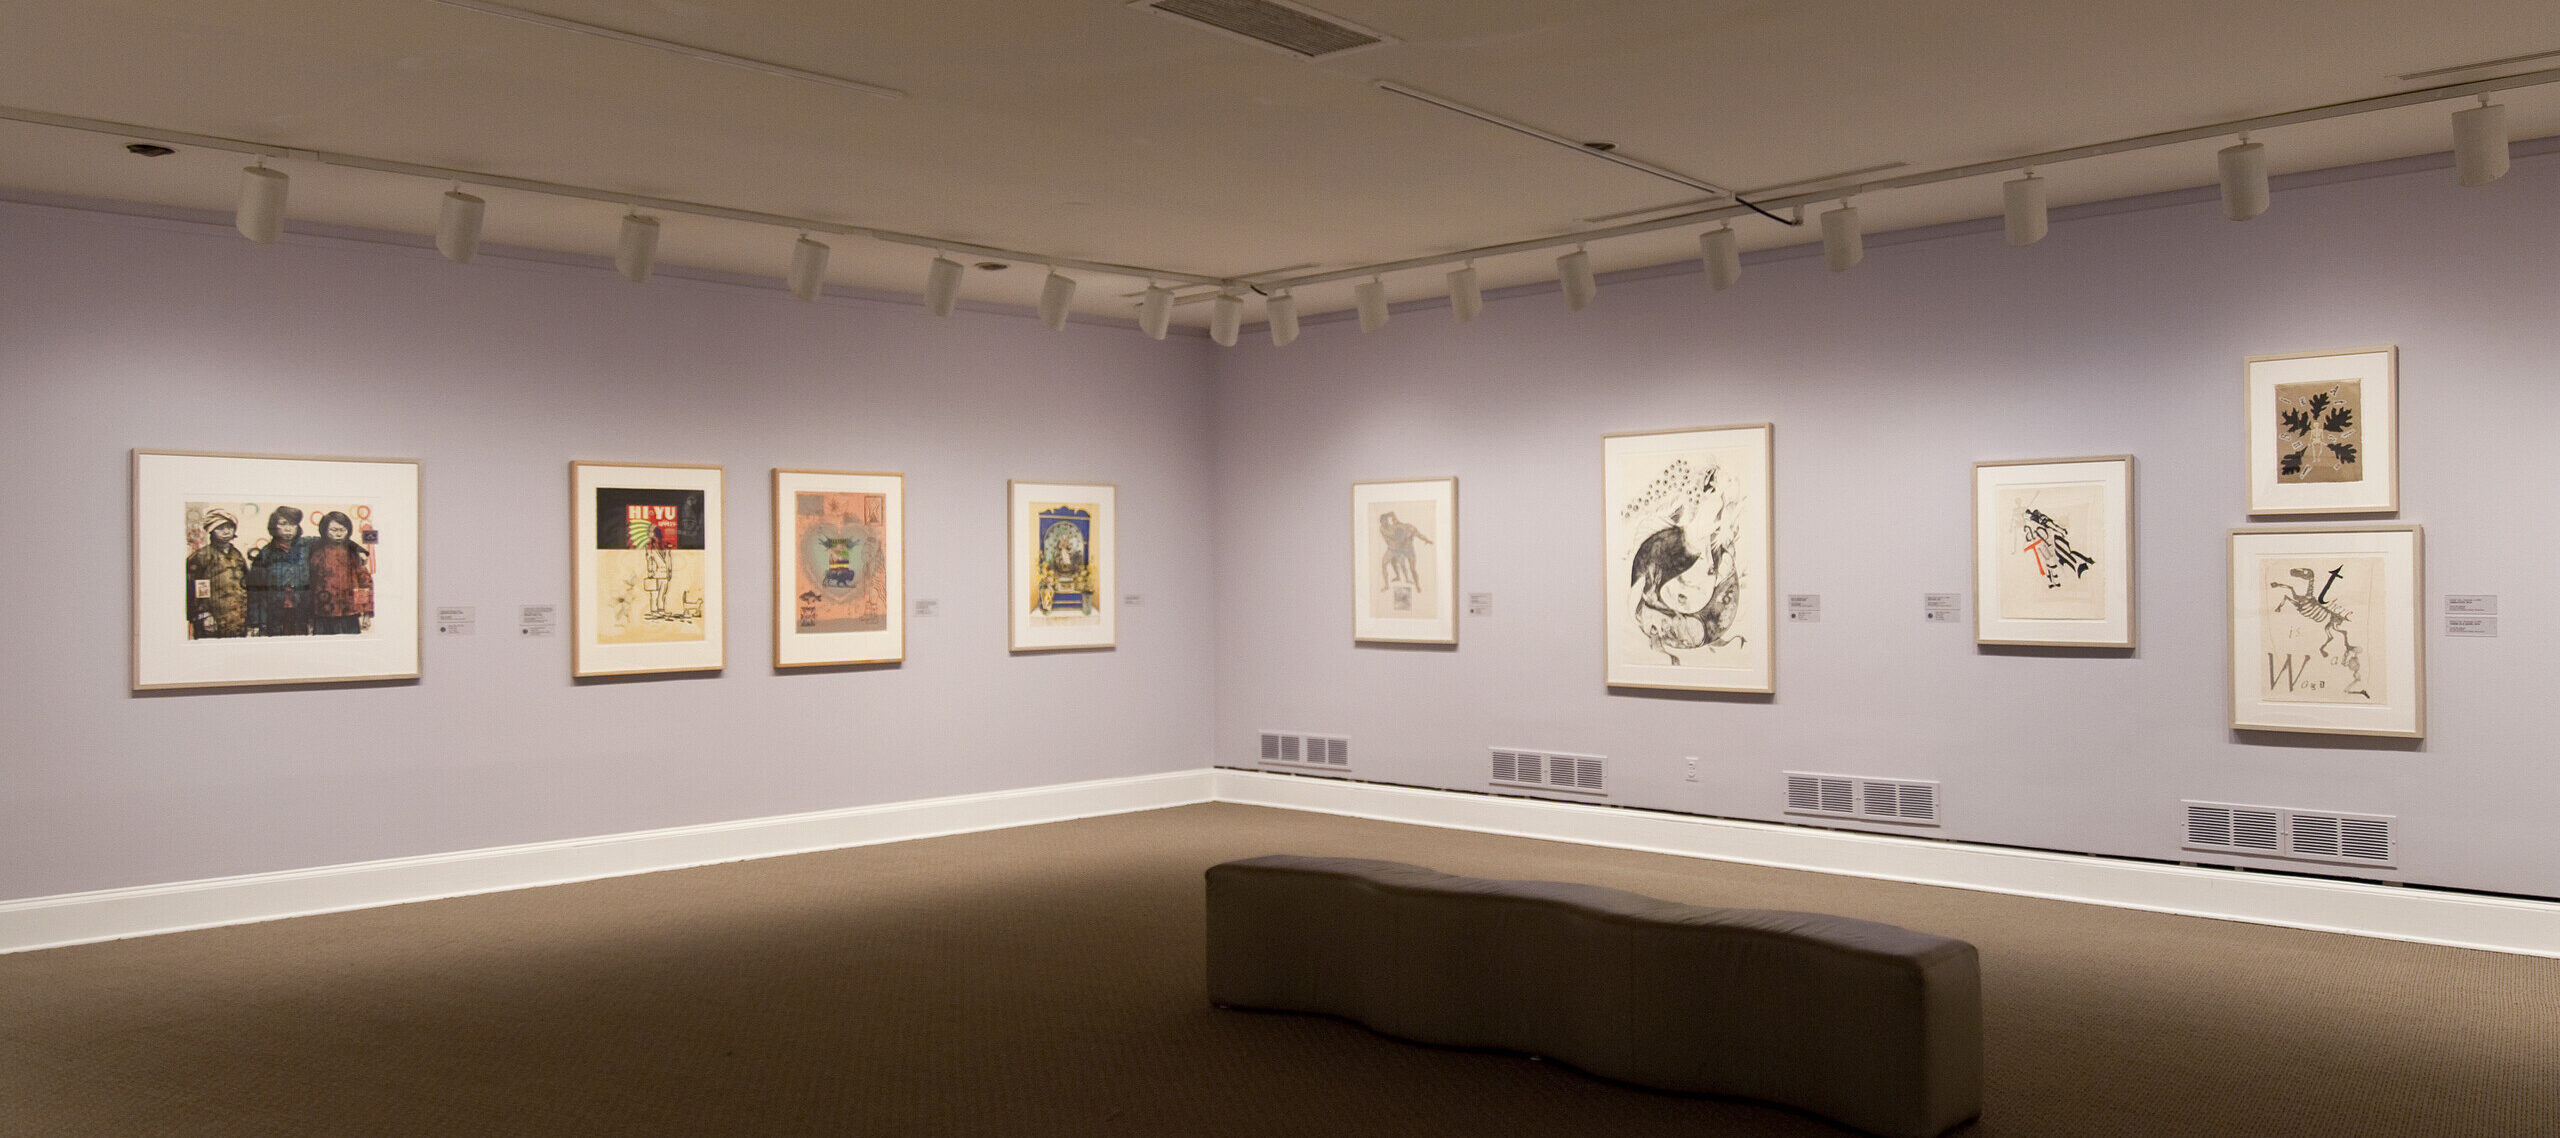 View of an exhibition space with white and lilac walls. There are several prints and lithographs hanging on the walls.